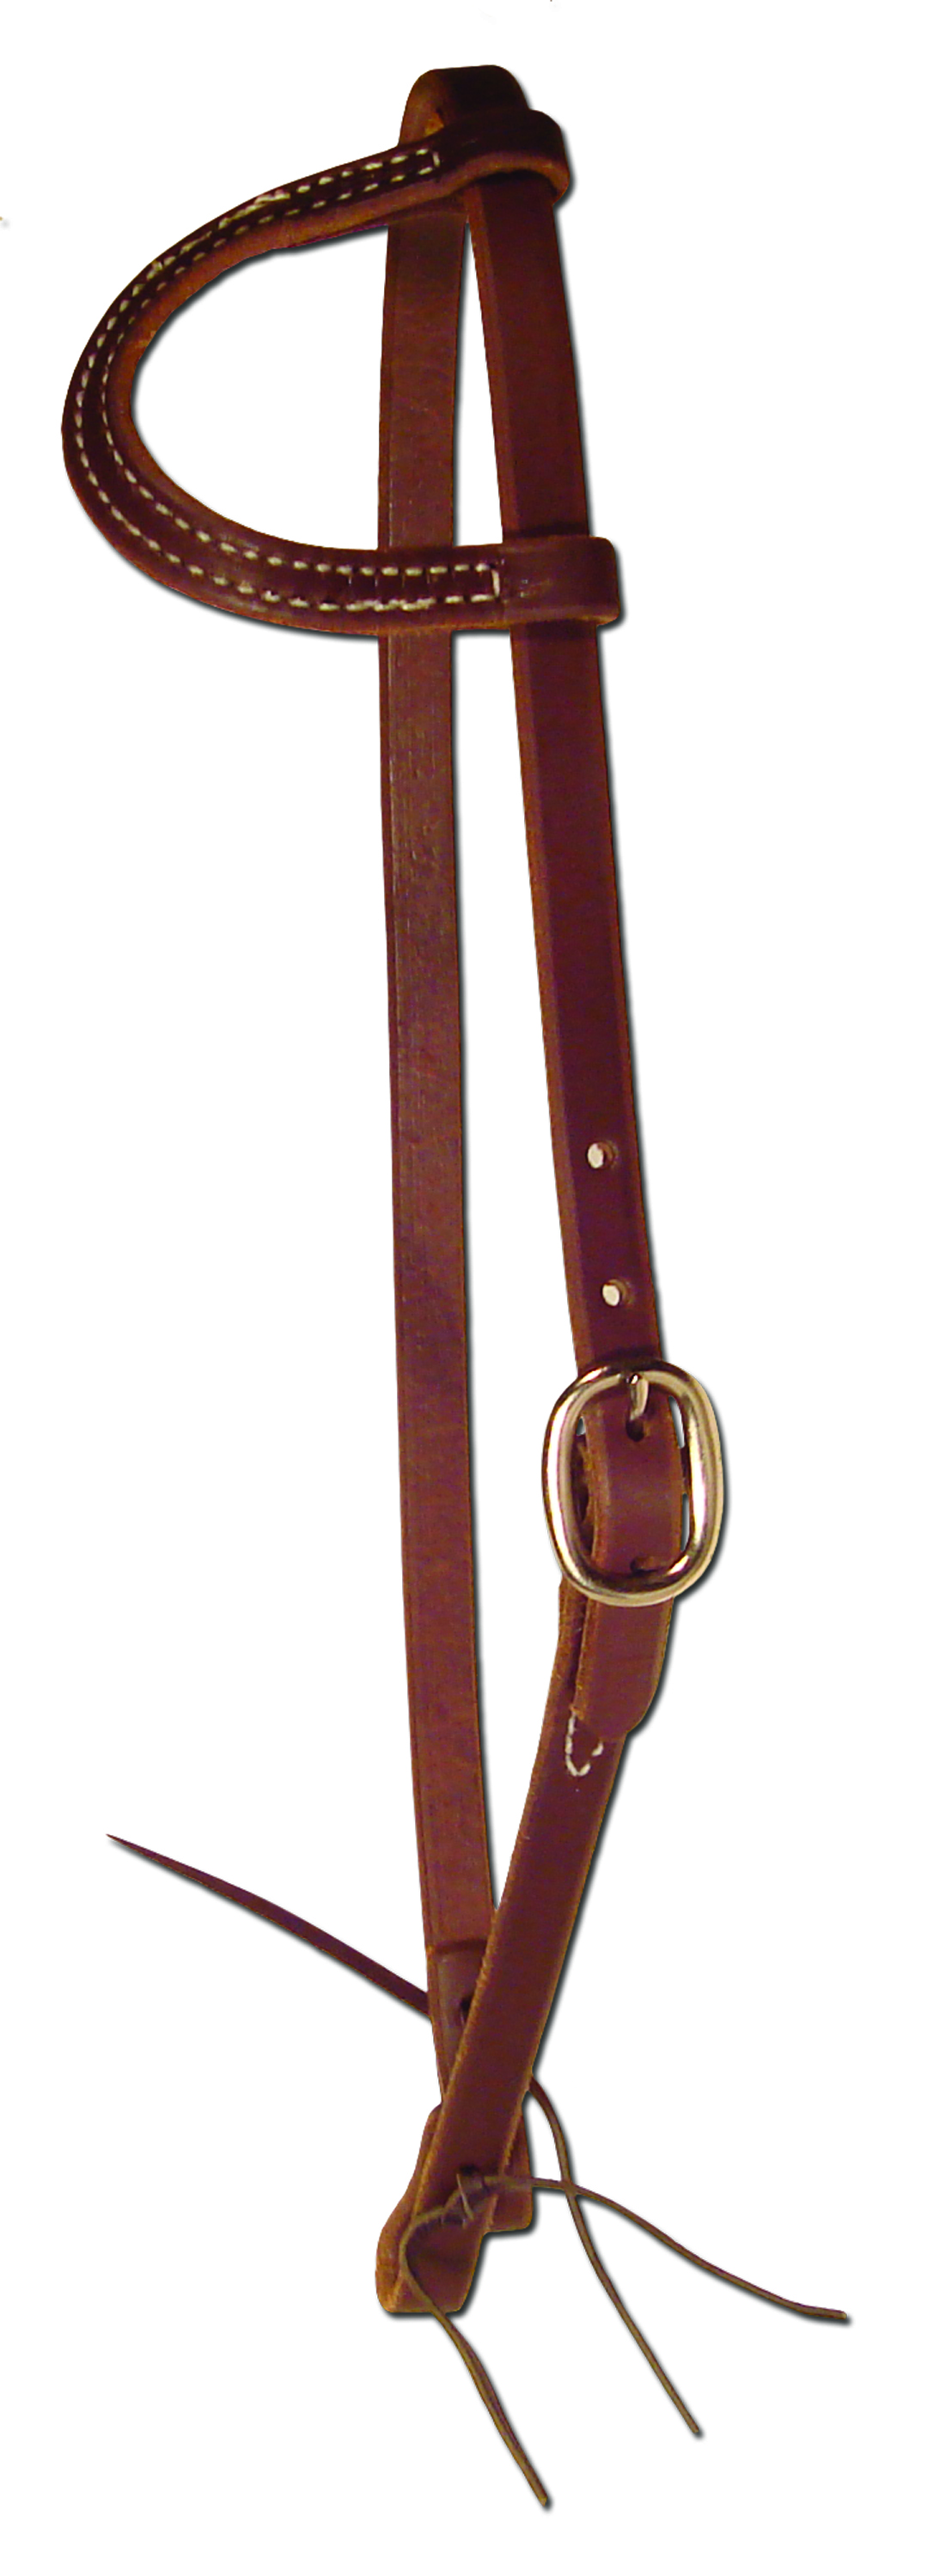 The Ranch Brand One Ear Headstall by Berlin Leather Company